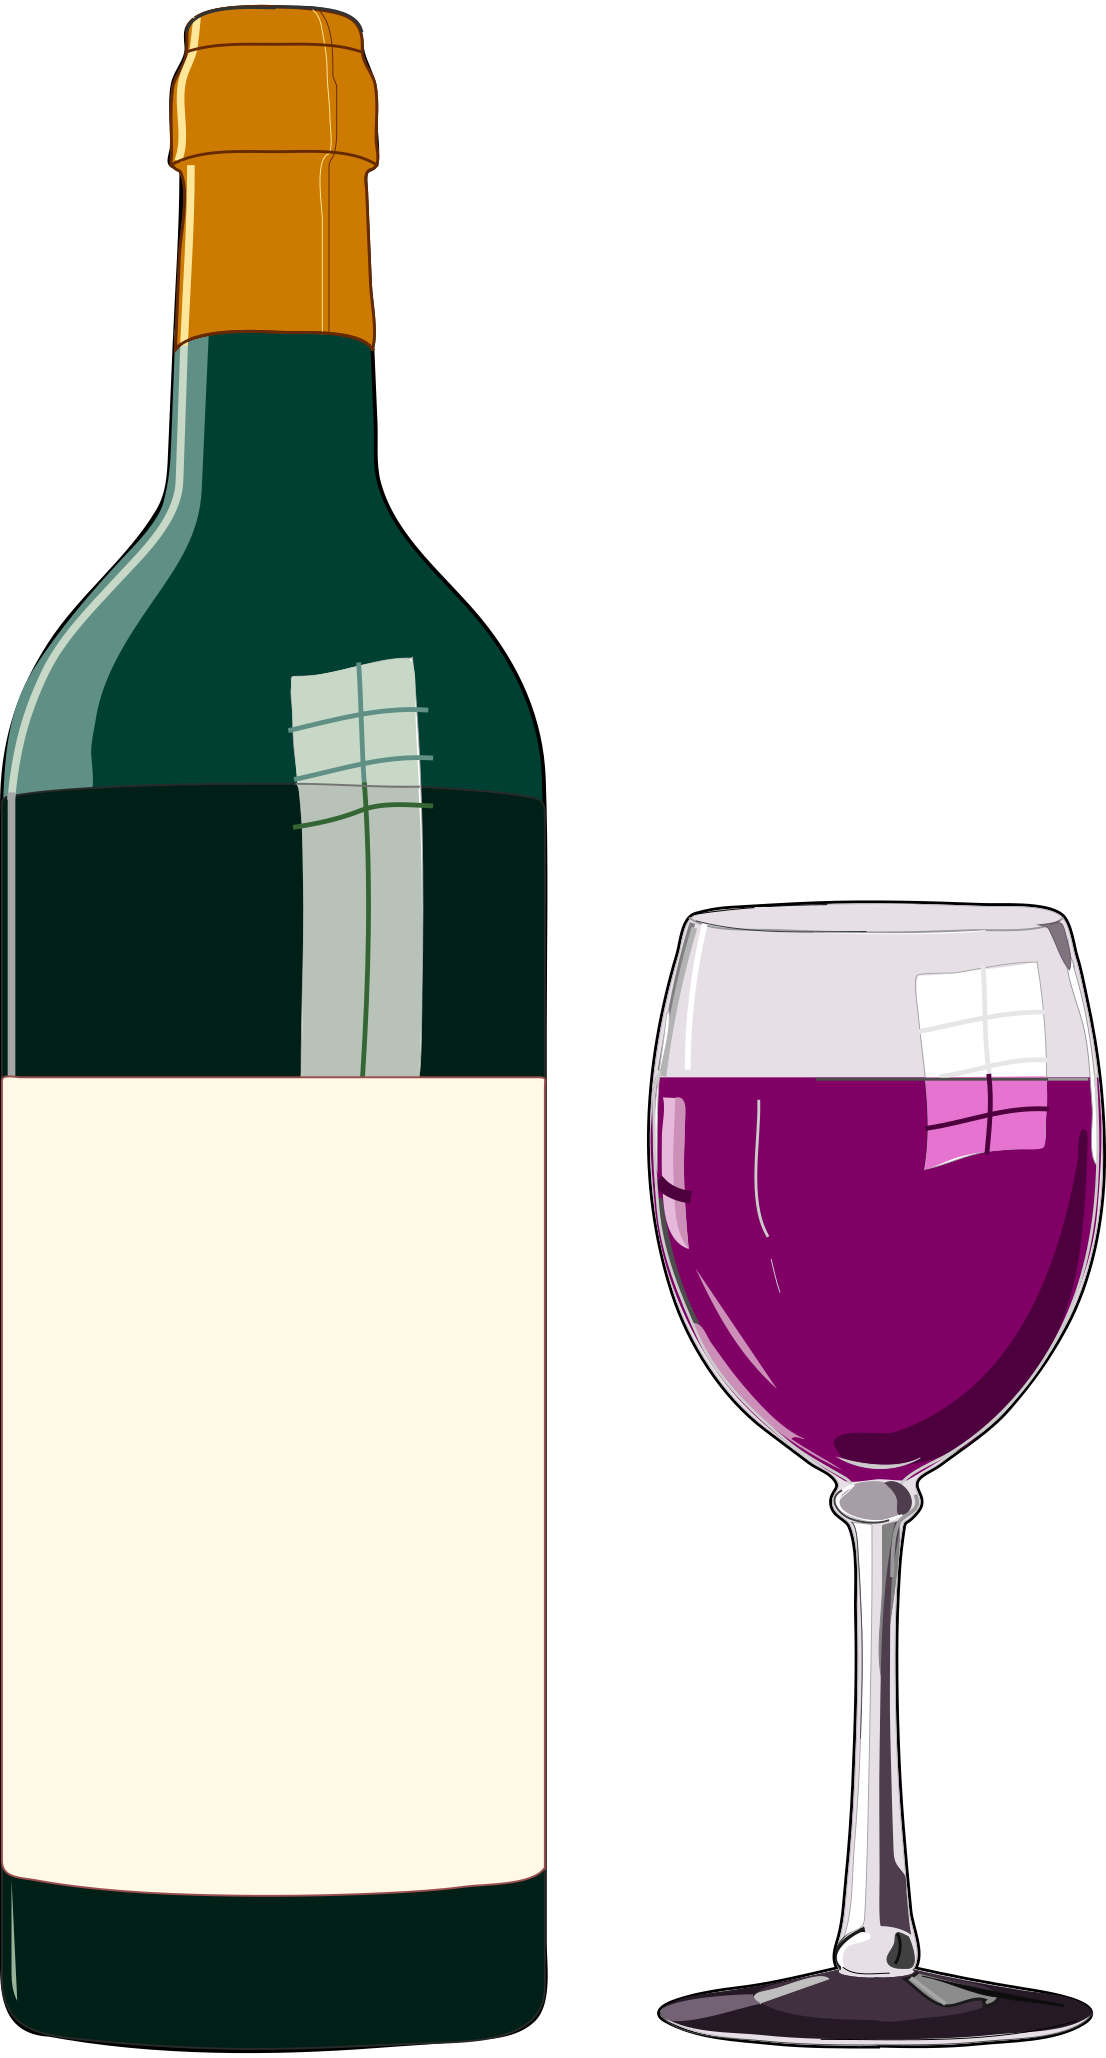 Download File A Bottle And Glass Of Wine Svg Wikimedia Commons